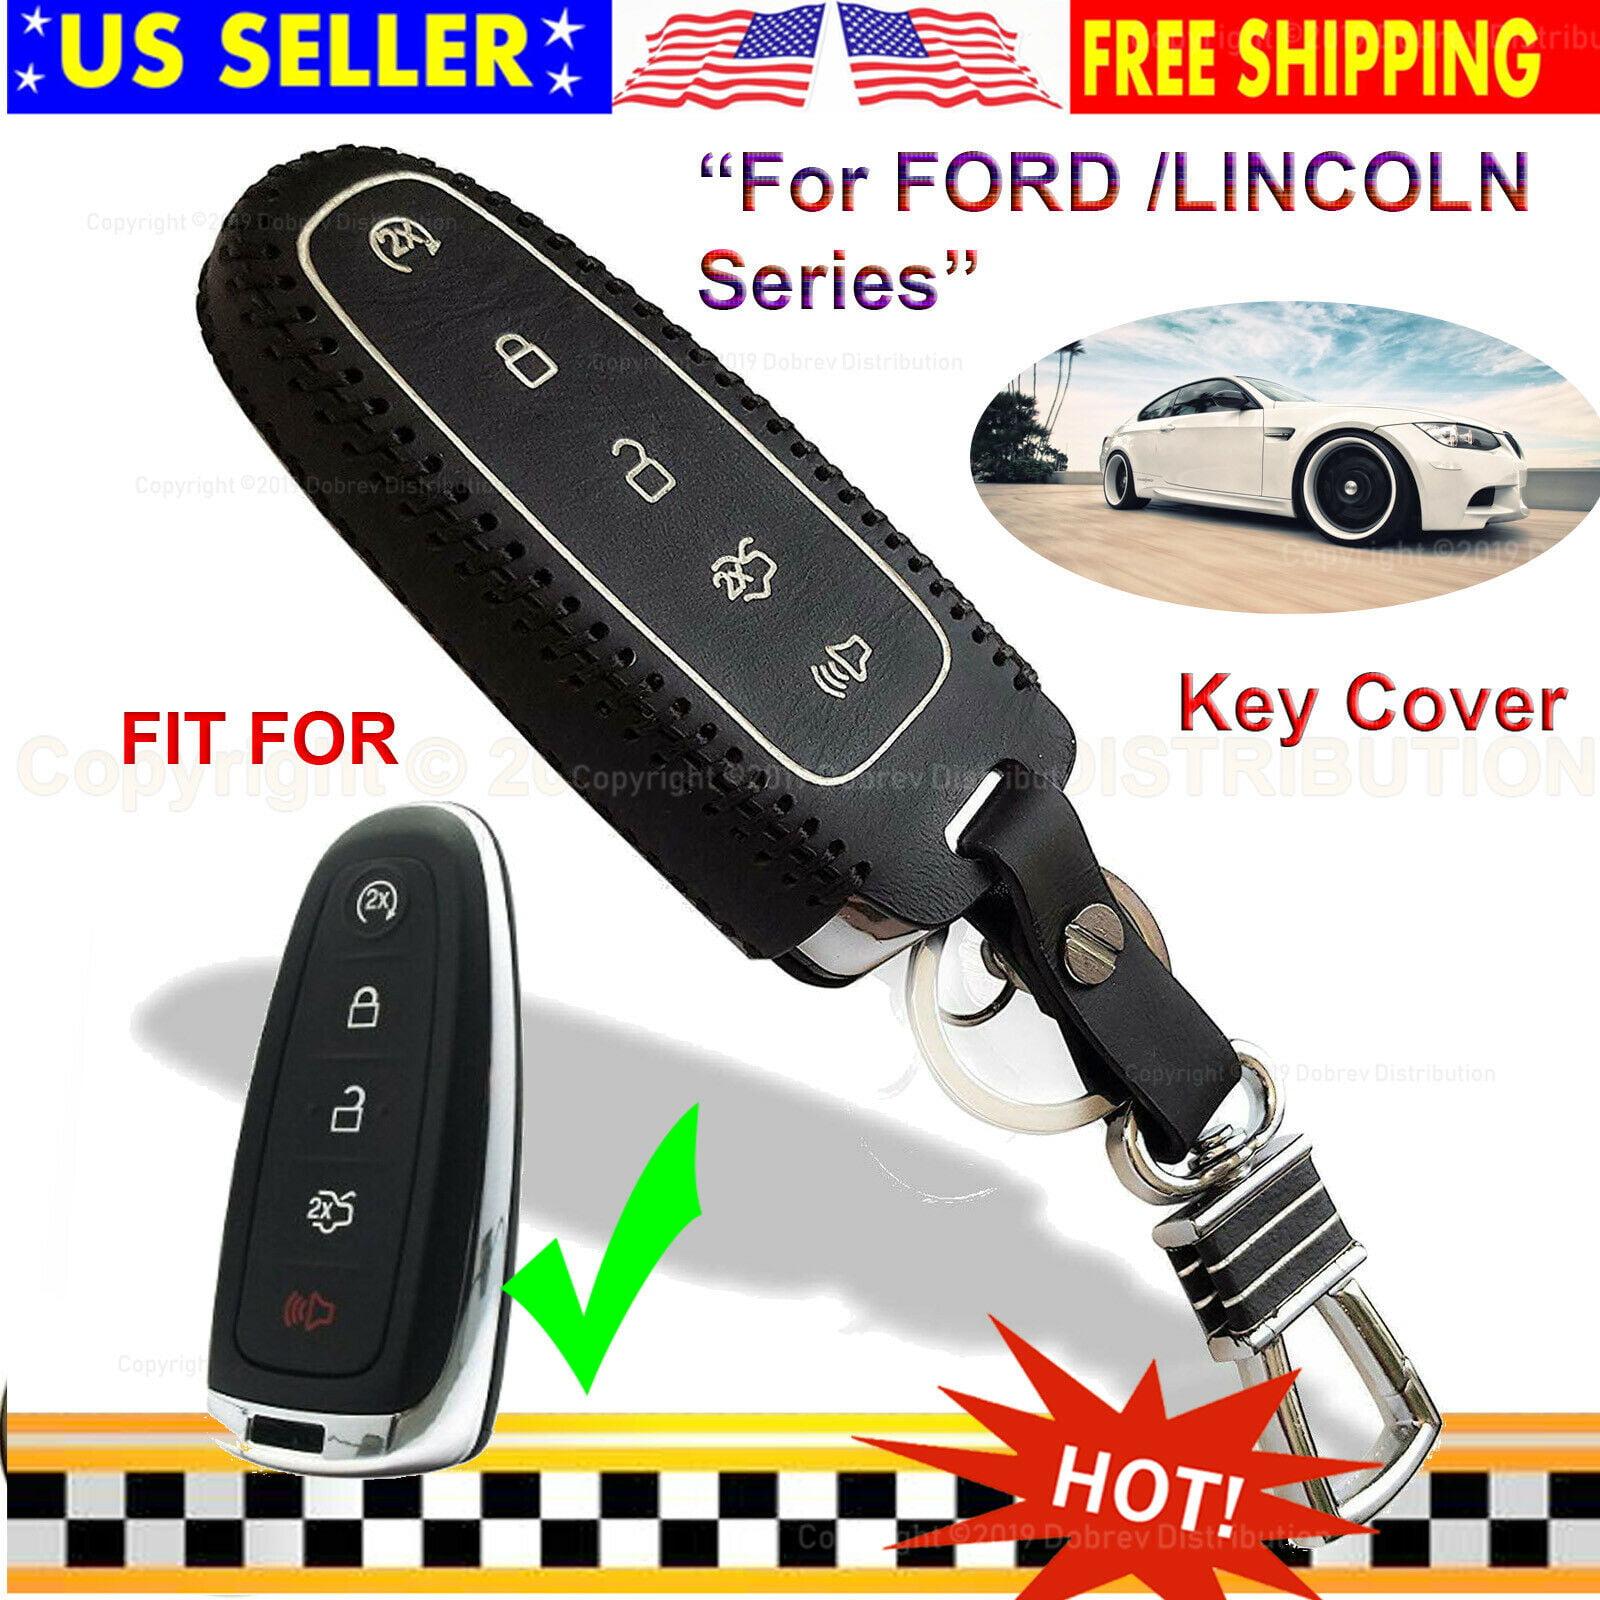 Ford Replacement Key Fob Shell Case Cover Smart Keyless Entry Remote Blank Key for Ford Edge Escape Explorer Focus Flex Taurus Fusion 